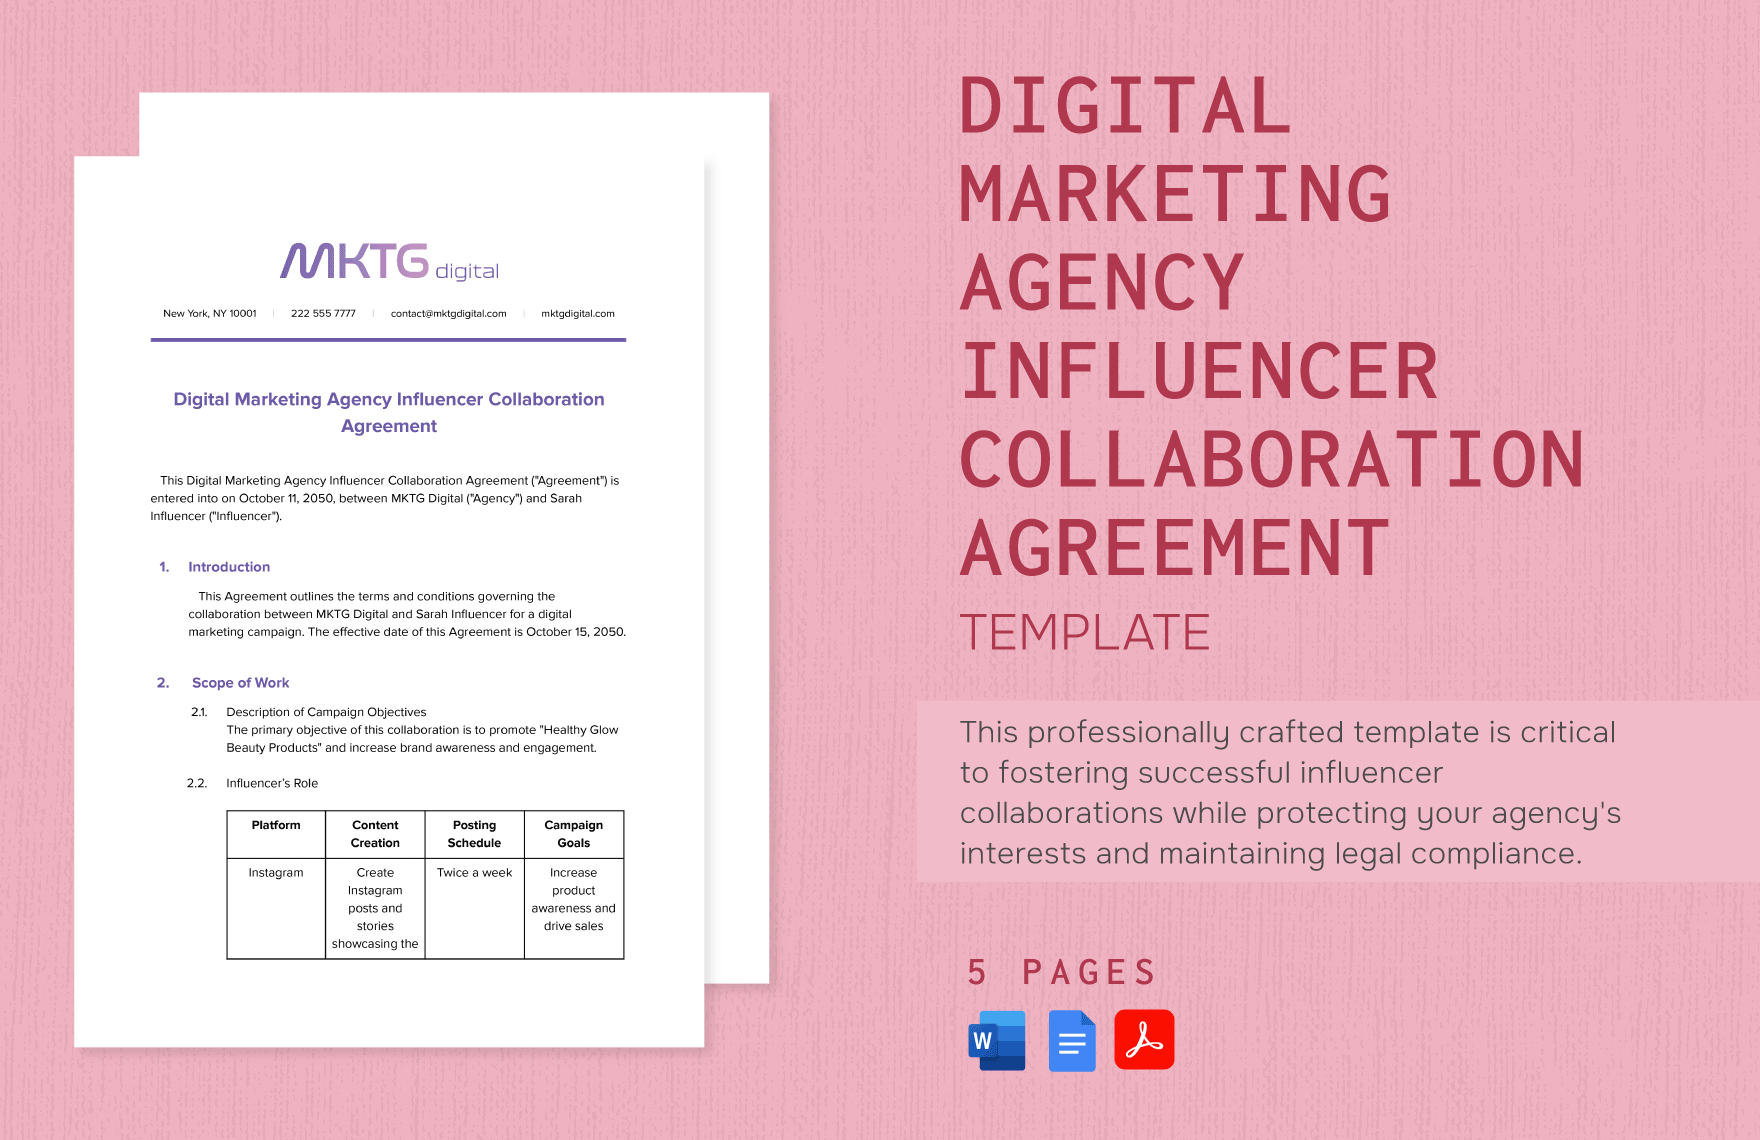 Digital Marketing Agency Influencer Collaboration Agreement Template